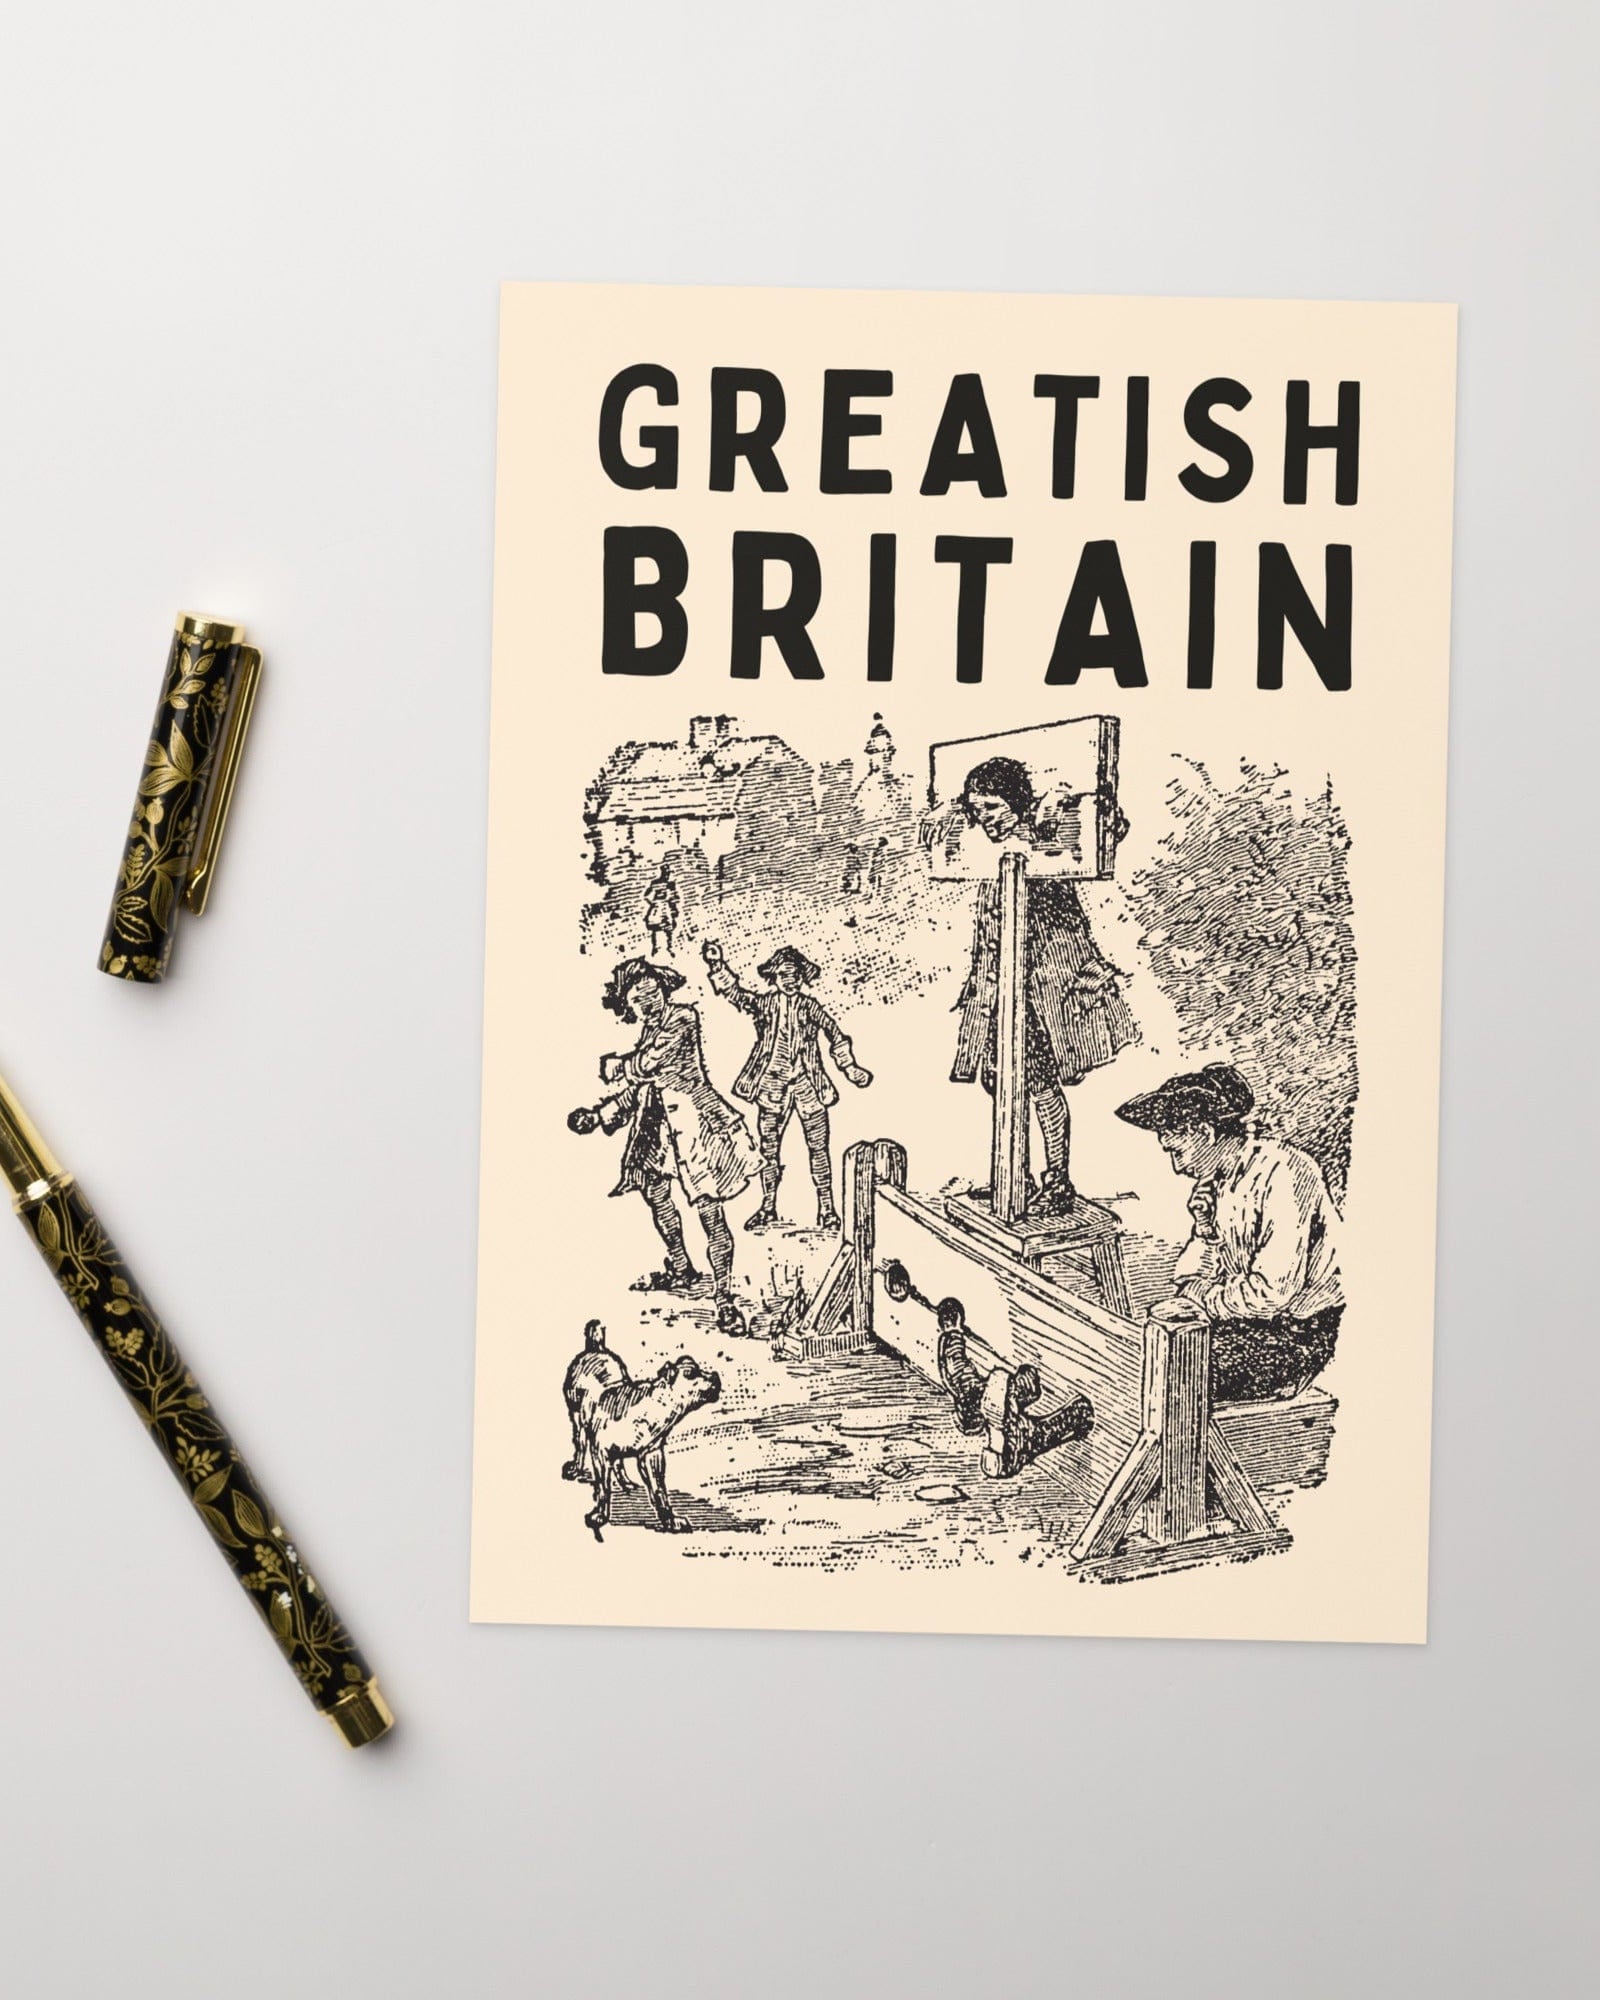 The Greatish Britain collection of cheeky apparel and gifts for Brits & Anglophiles